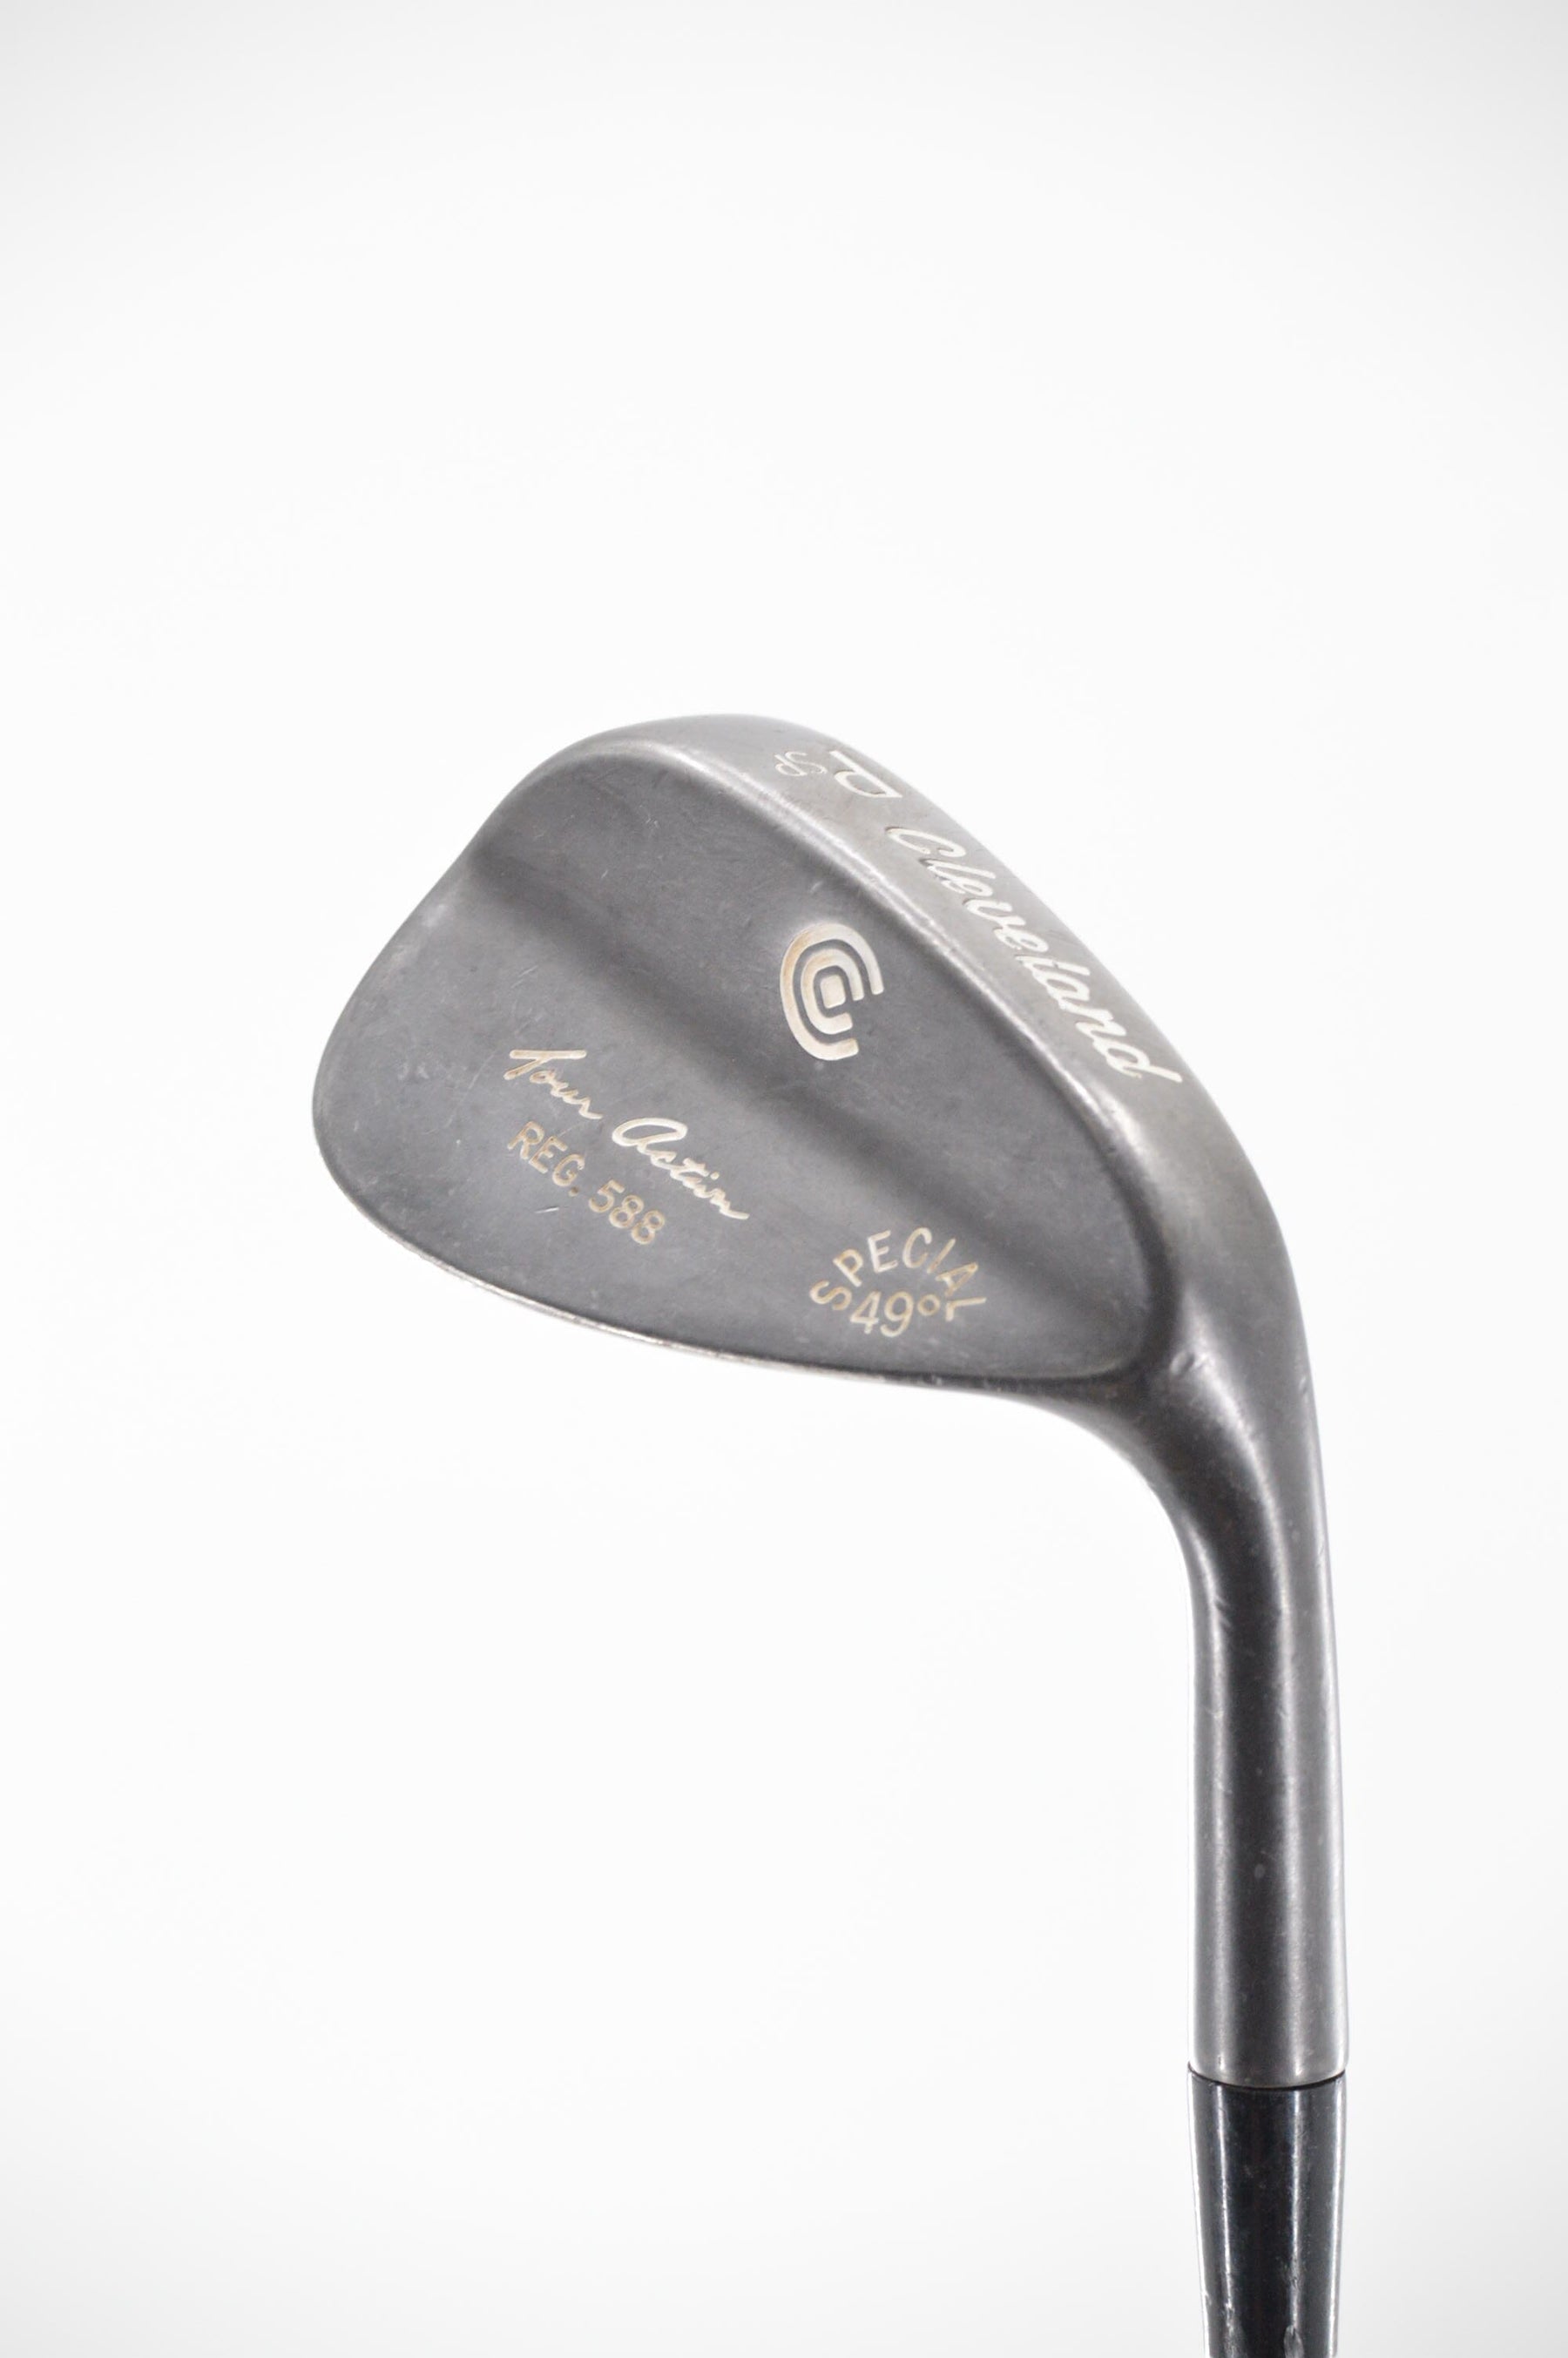 Cleveland 588 Tour Action PW Wedge Golf Clubs GolfRoots 